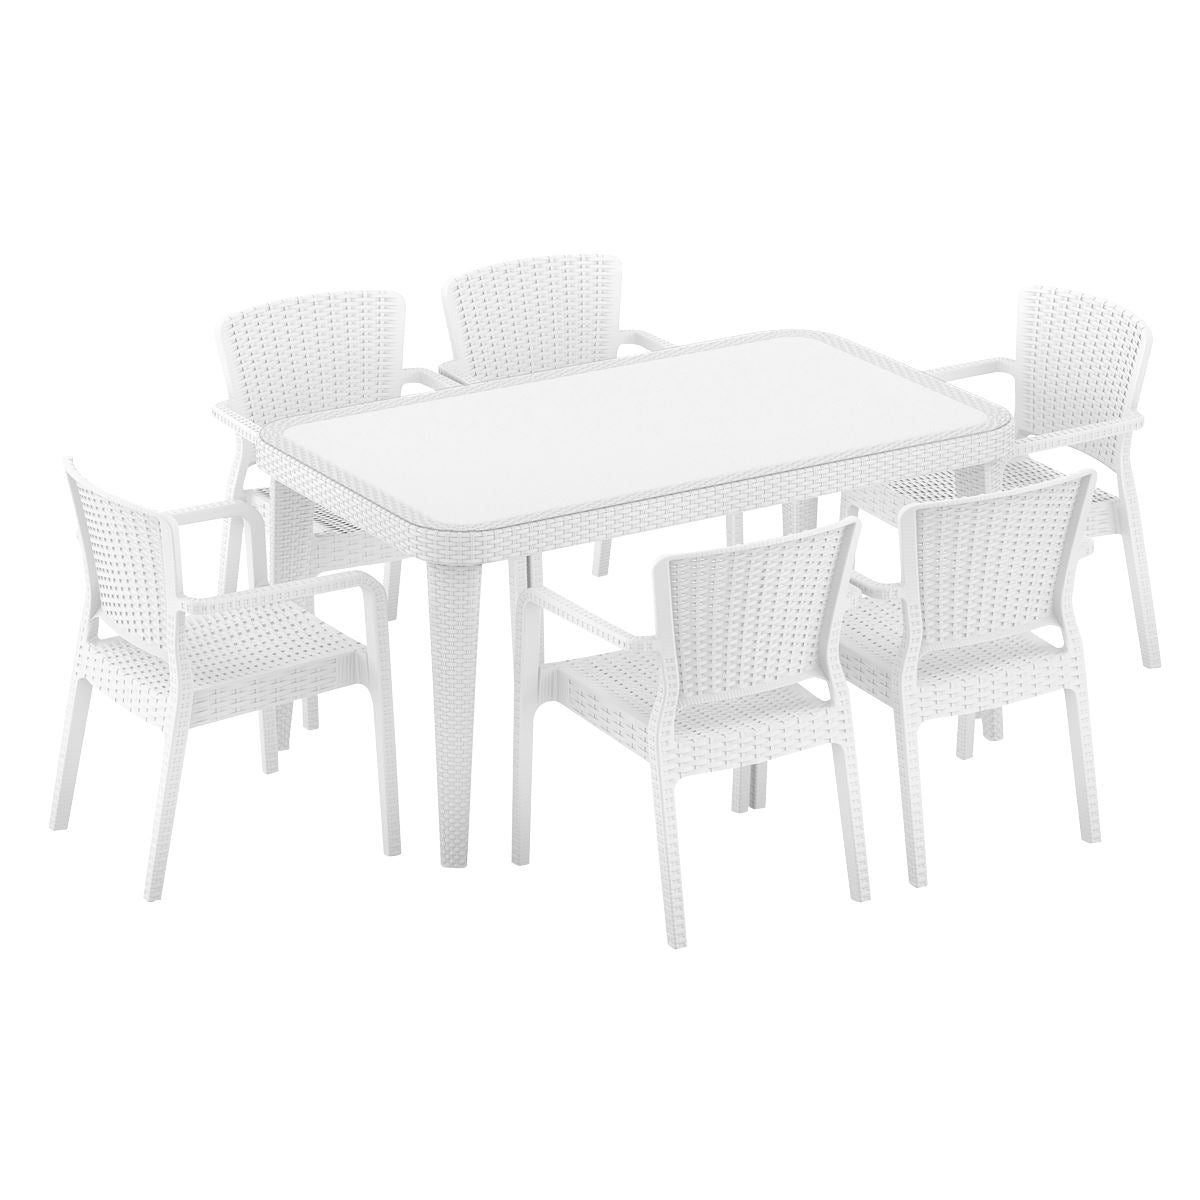 Dellonda 7-Piece Dining Set Weather-Resistant Polypropylene/Fibreglass , Tempered Glass Table Top, Stackable Chairs - White